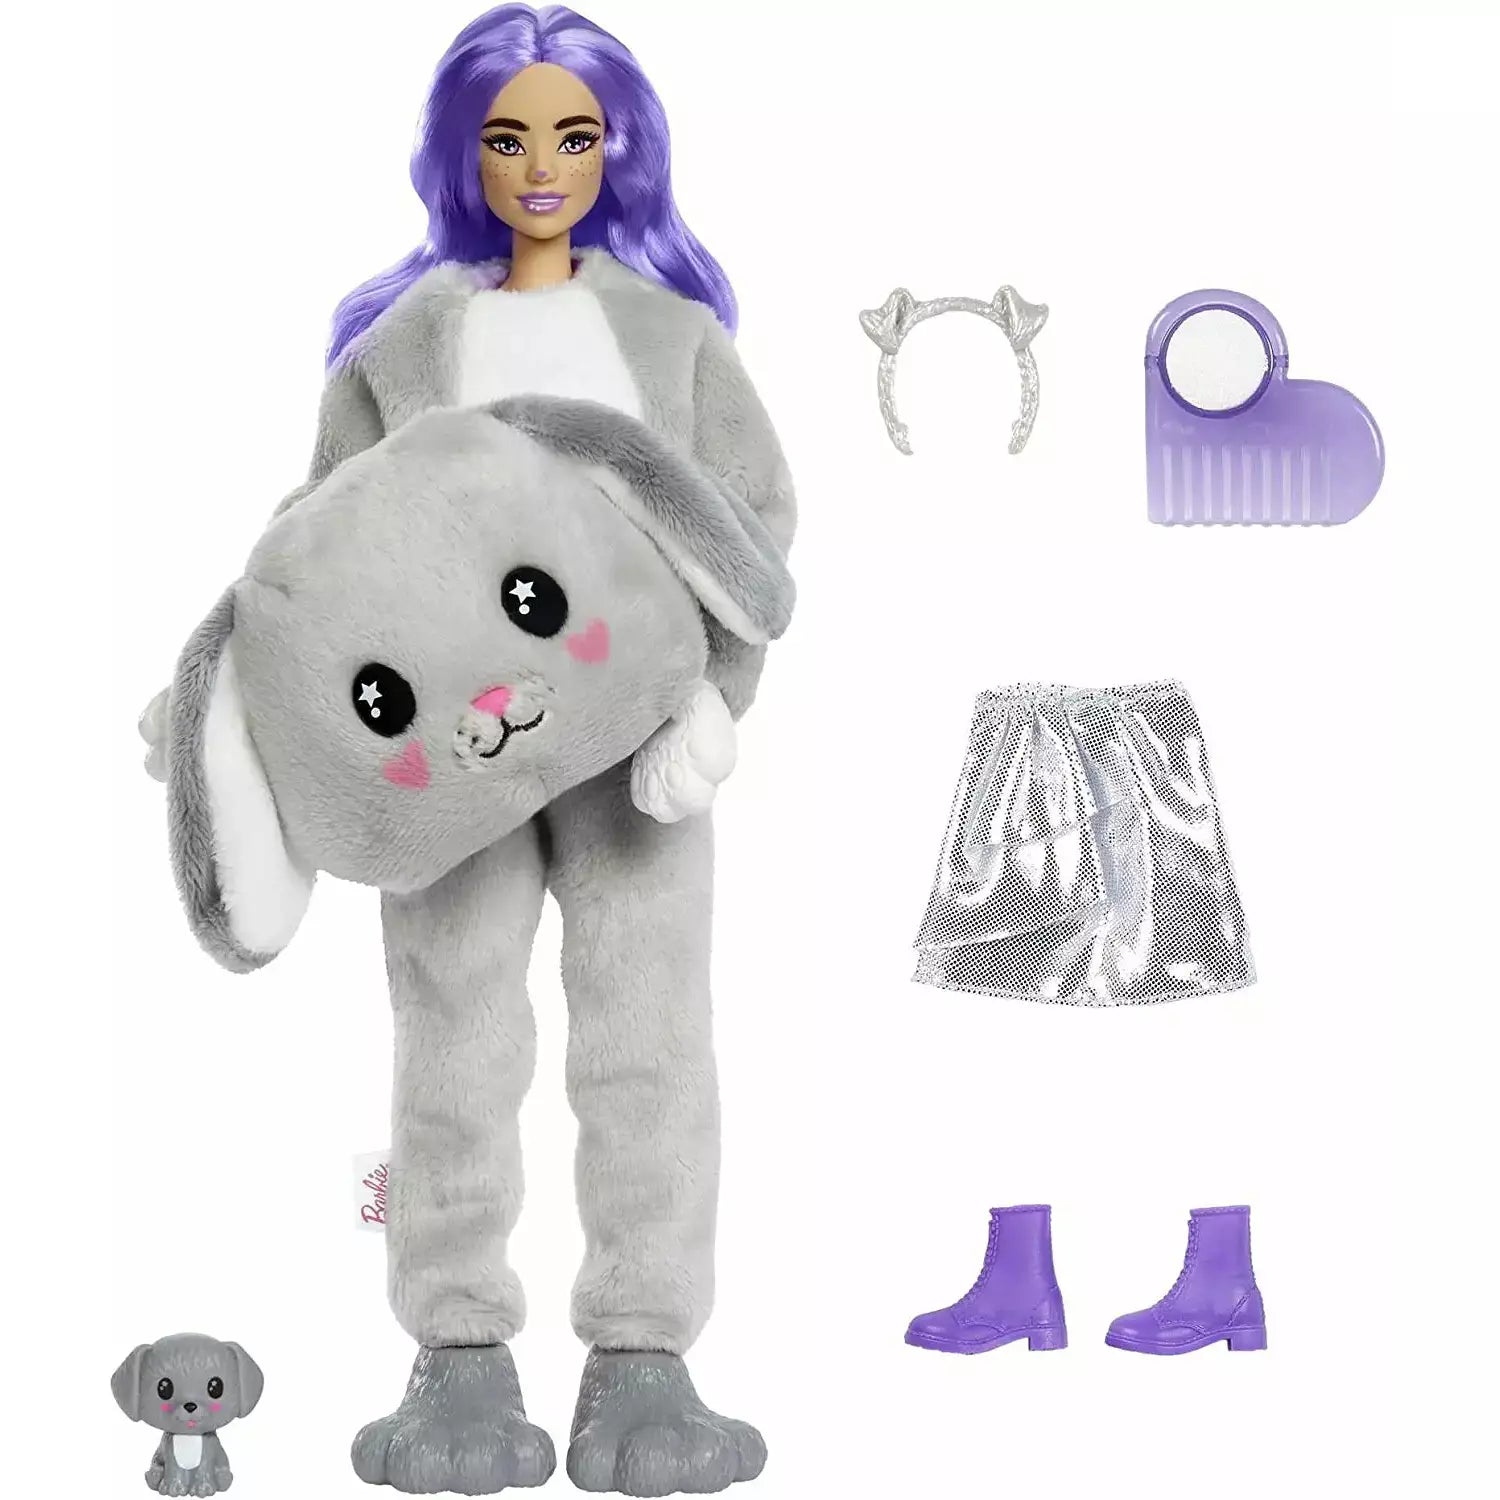 Barbie Cutie Reveal Doll With Puppy Plush Costume & 10 Surprises Including Mini Pet & Color Change - BumbleToys - 5-7 Years, Barbie, Fashion Dolls & Accessories, Girls, OXE, Pre-Order